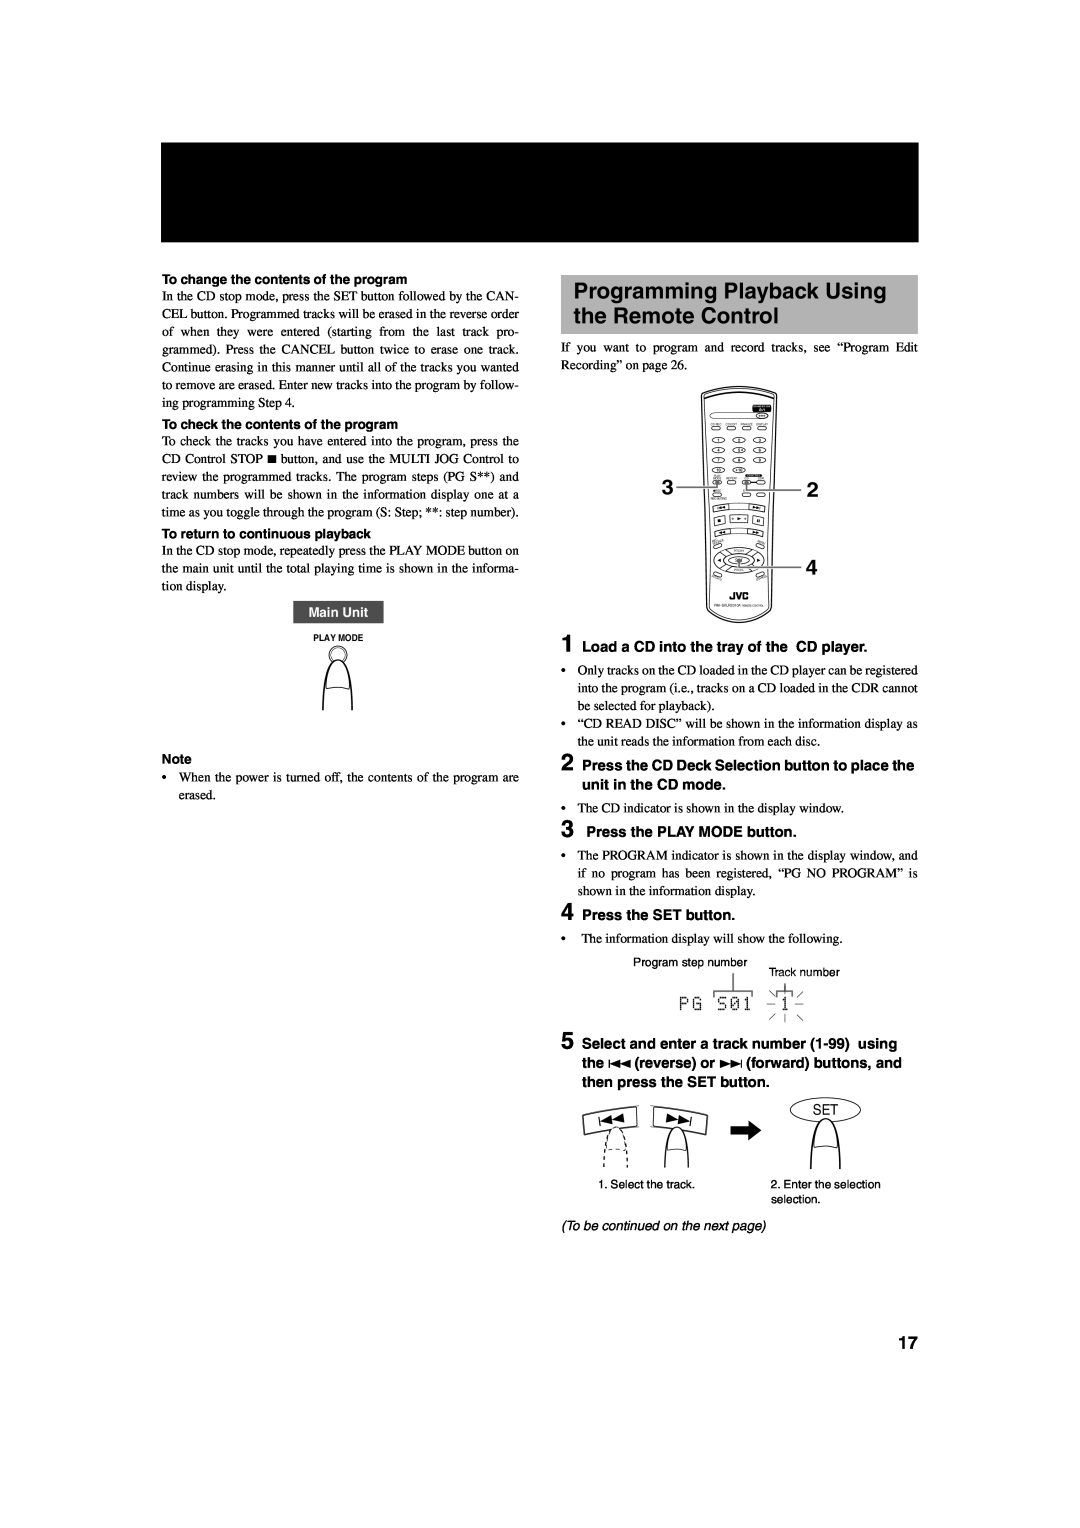 JVC XL-R2010BK manual Programming Playback Using the Remote Control, To change the contents of the program, Main Unit 